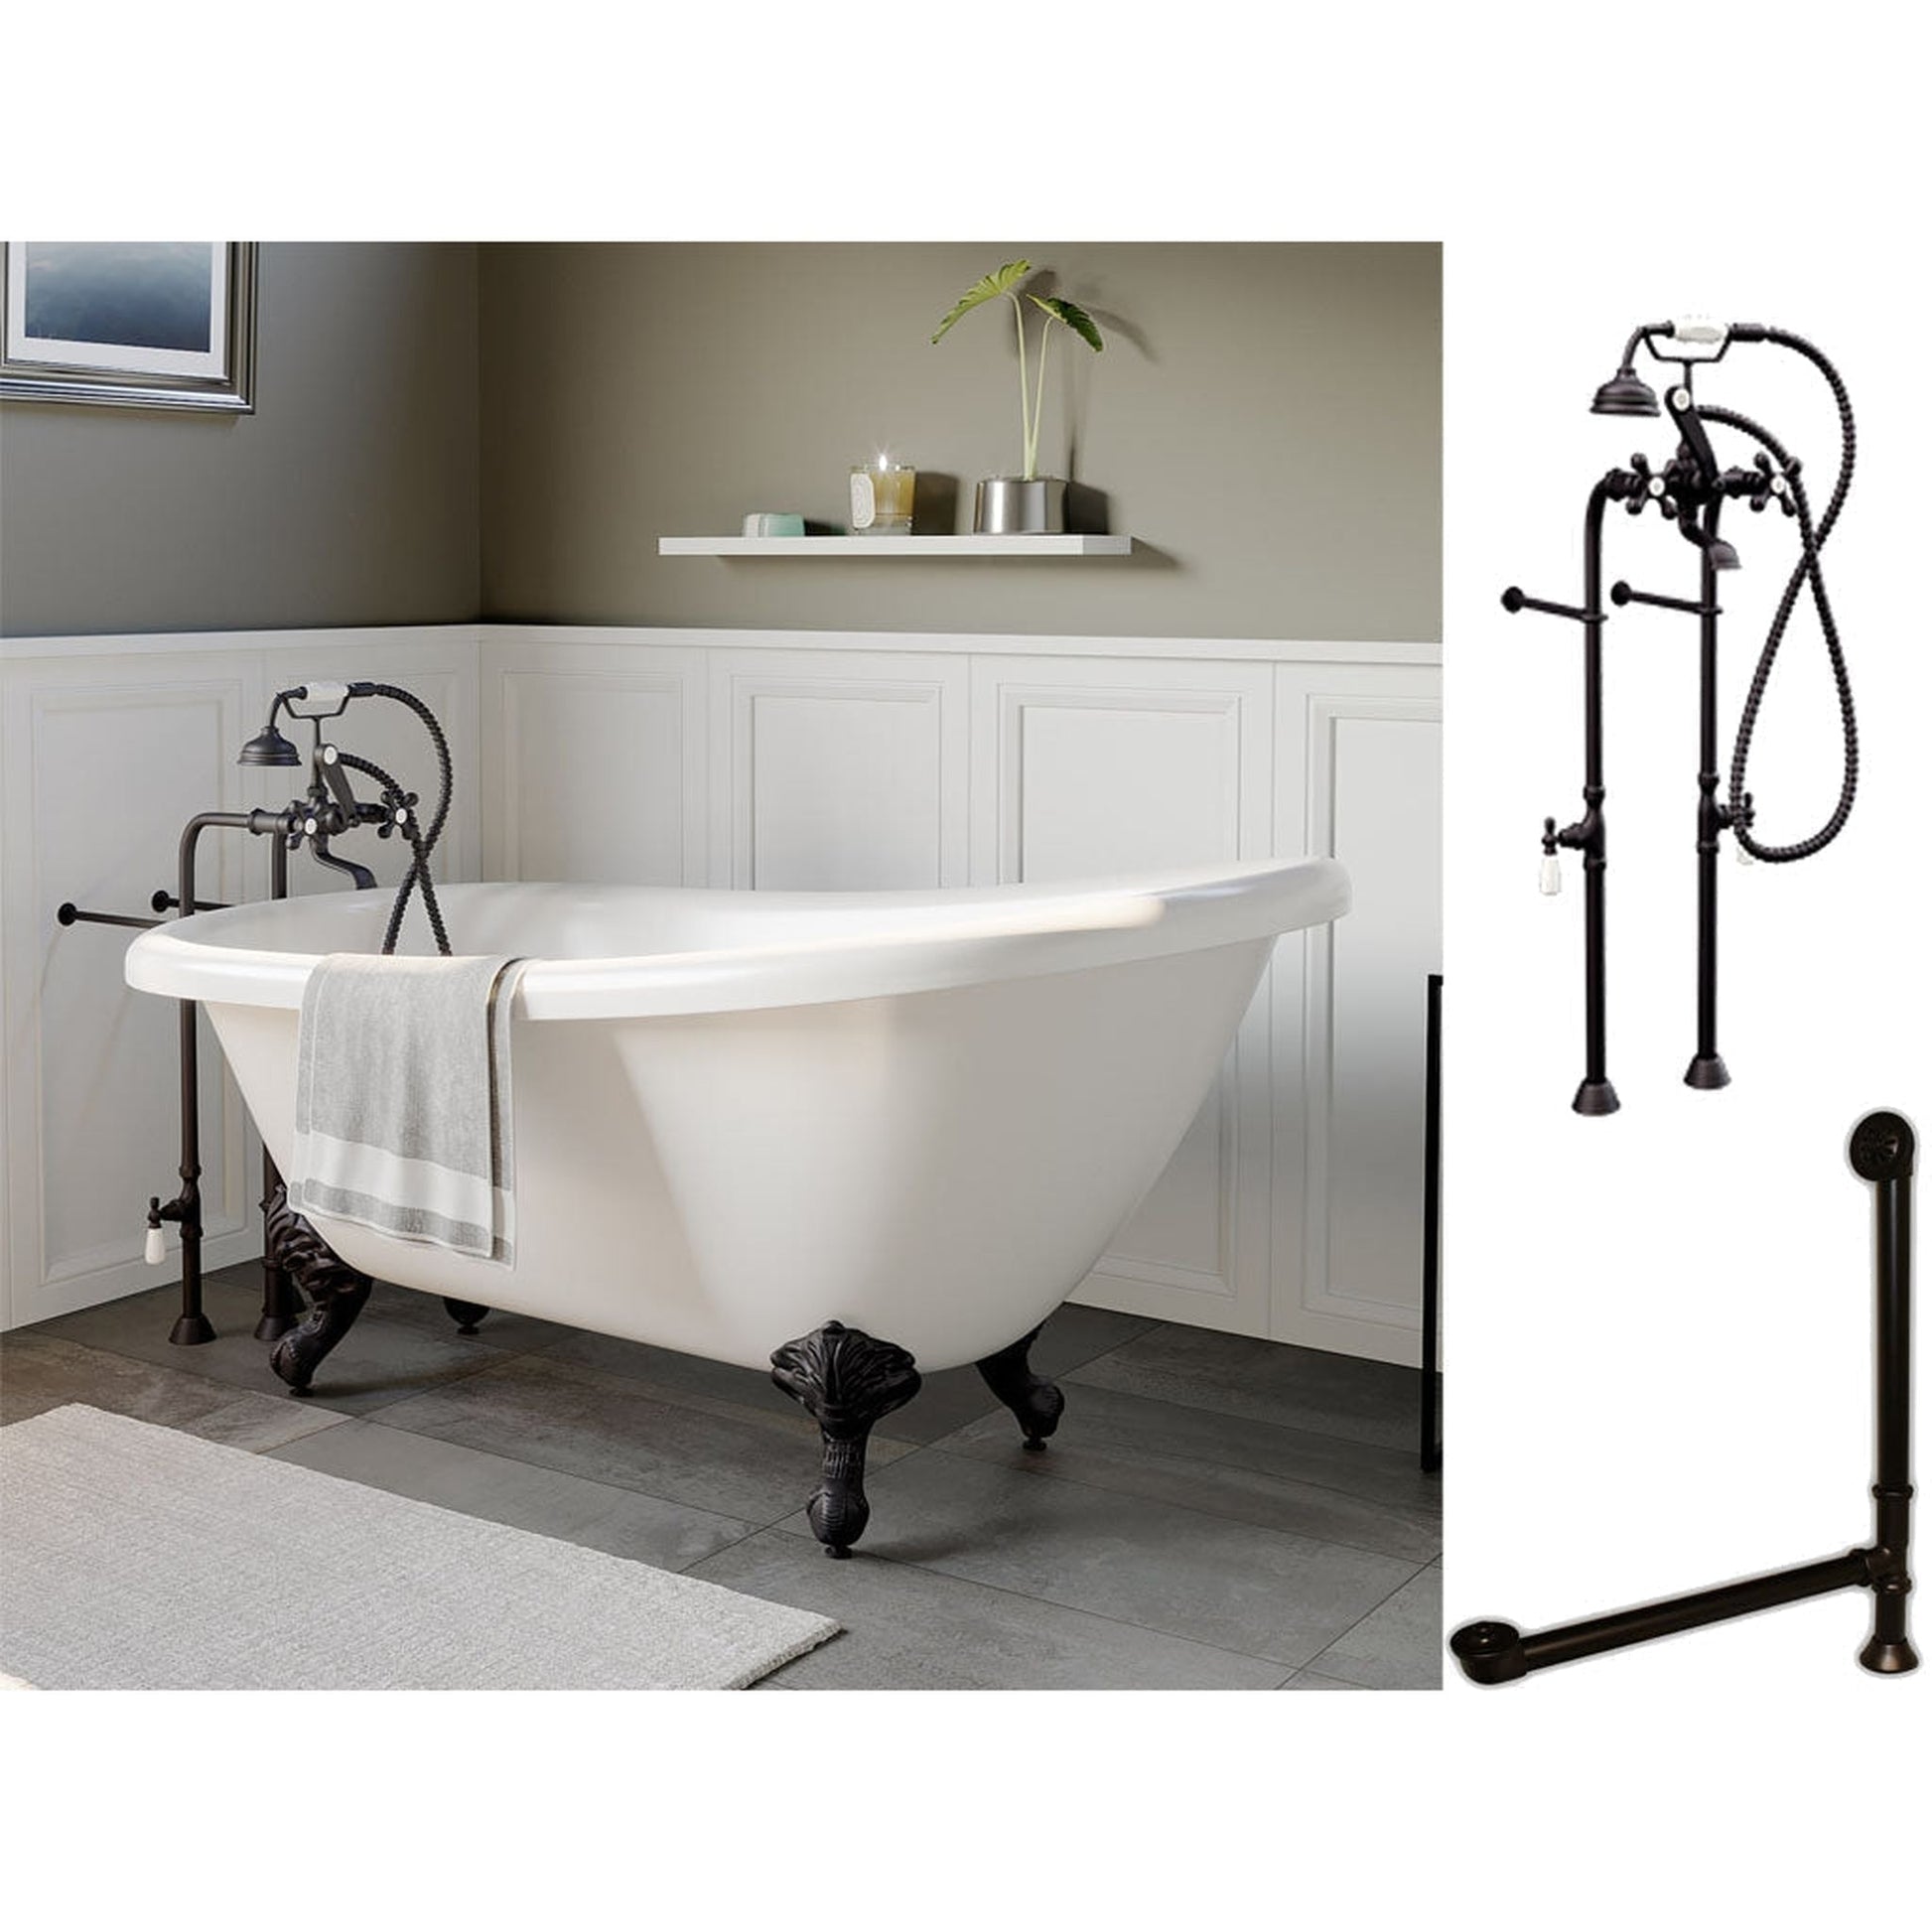 Cambridge Plumbing 67" White Acrylic Single Slipper Clawfeet Bathtub With No Deck Holes And Complete Plumbing Package Including Floor Mounted British Telephone Faucet, Supply Lines, Drain And Overflow Assembly In Oil Rubbed Bronze